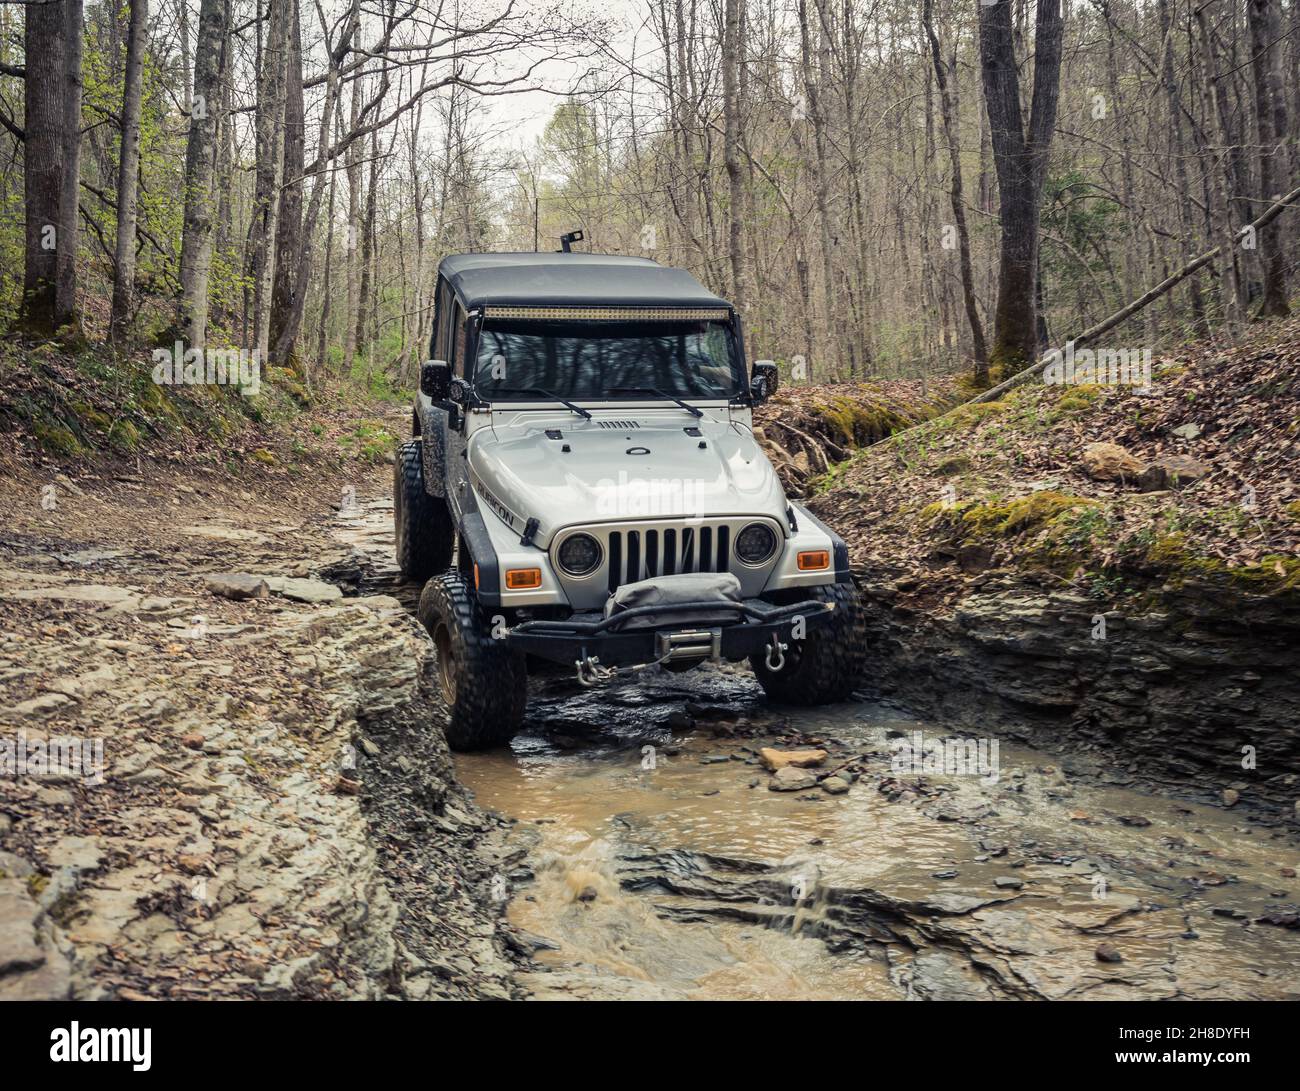 STANTON, UNITED STATES - Apr 14, 2021: A jeep wrangler off-road driving in  mud Stock Photo - Alamy